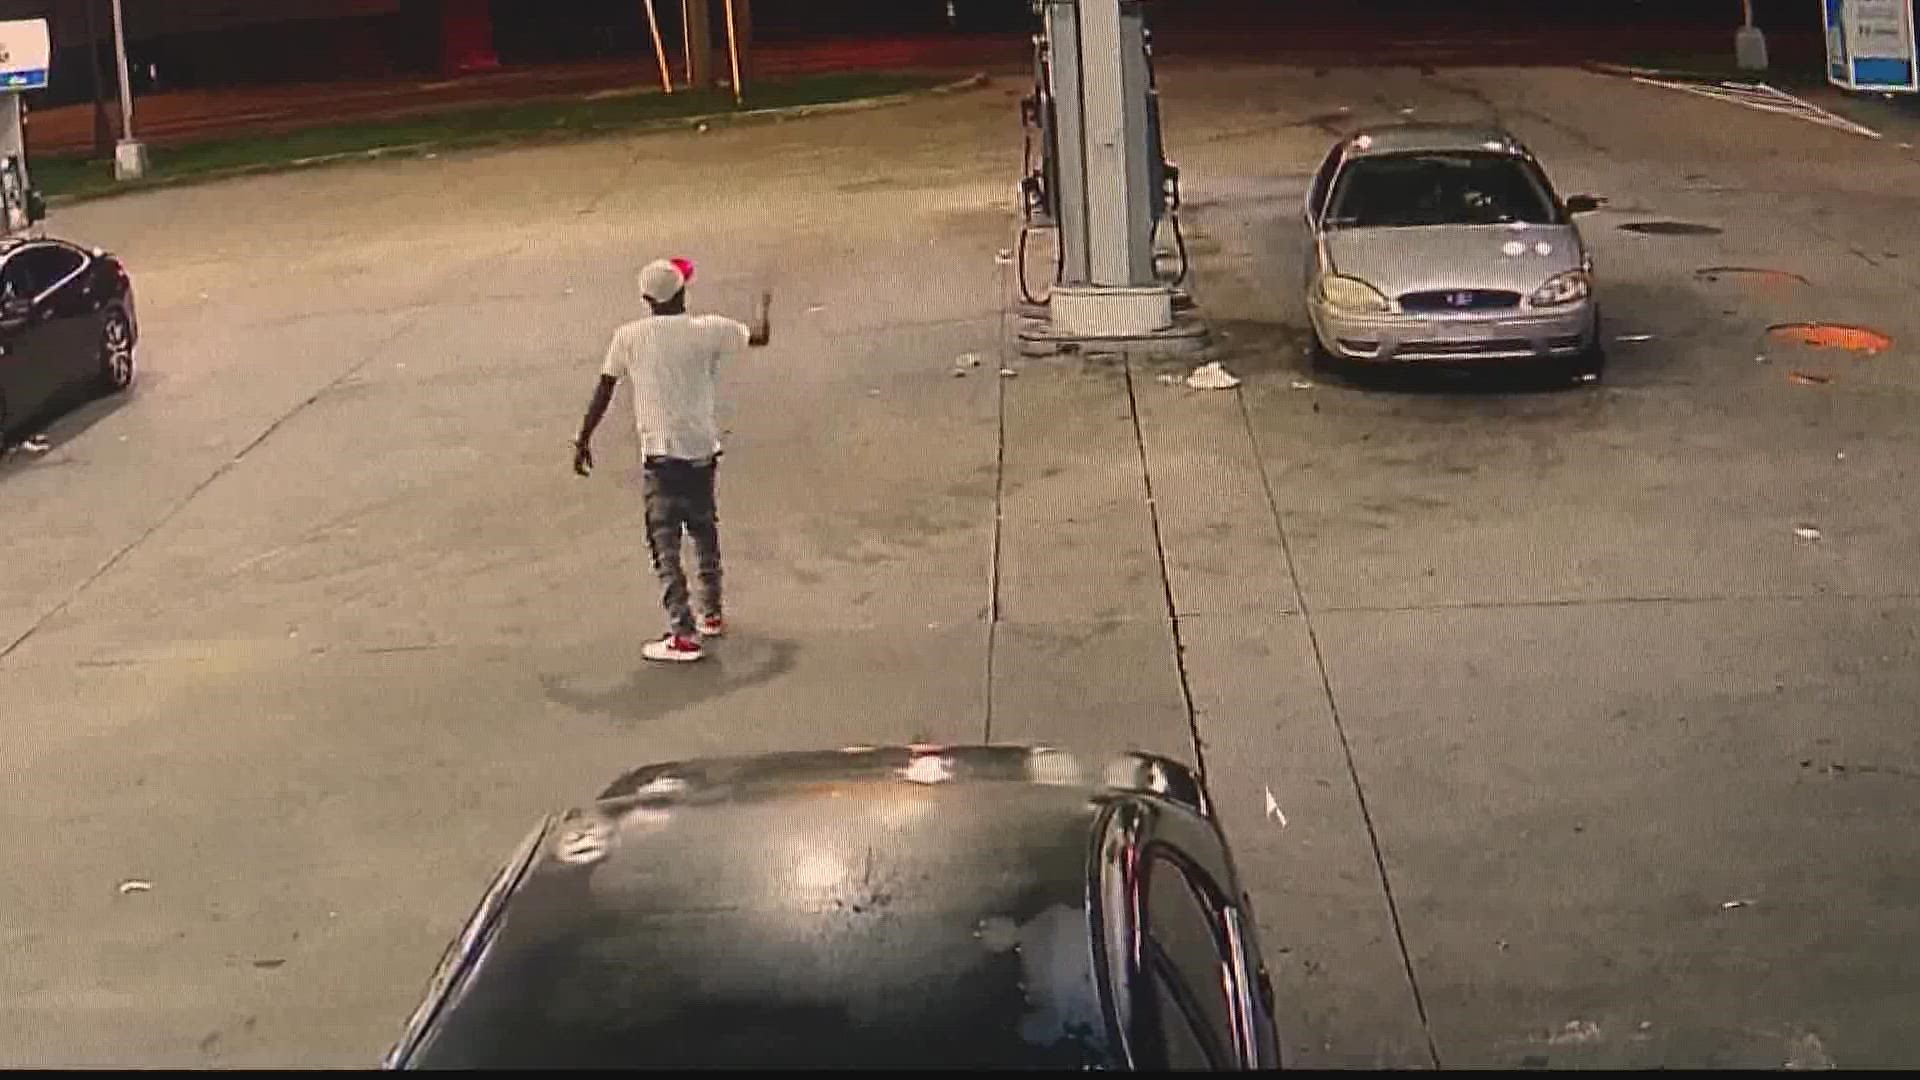 A clerk at the gas station said the surveillance video shows the man was killed when he tried to stop a fight.